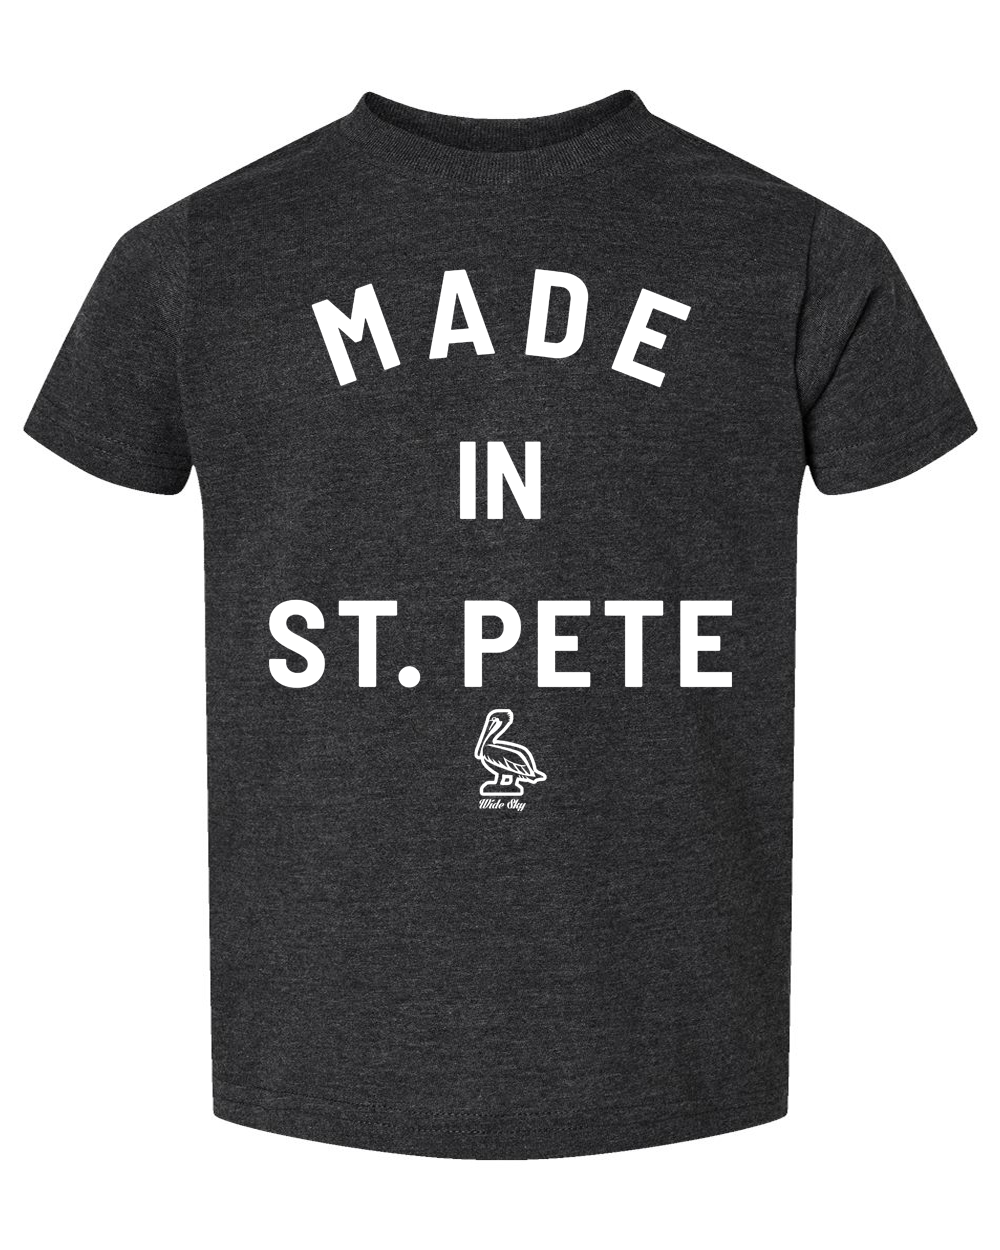 Made in St. Pete for Kids